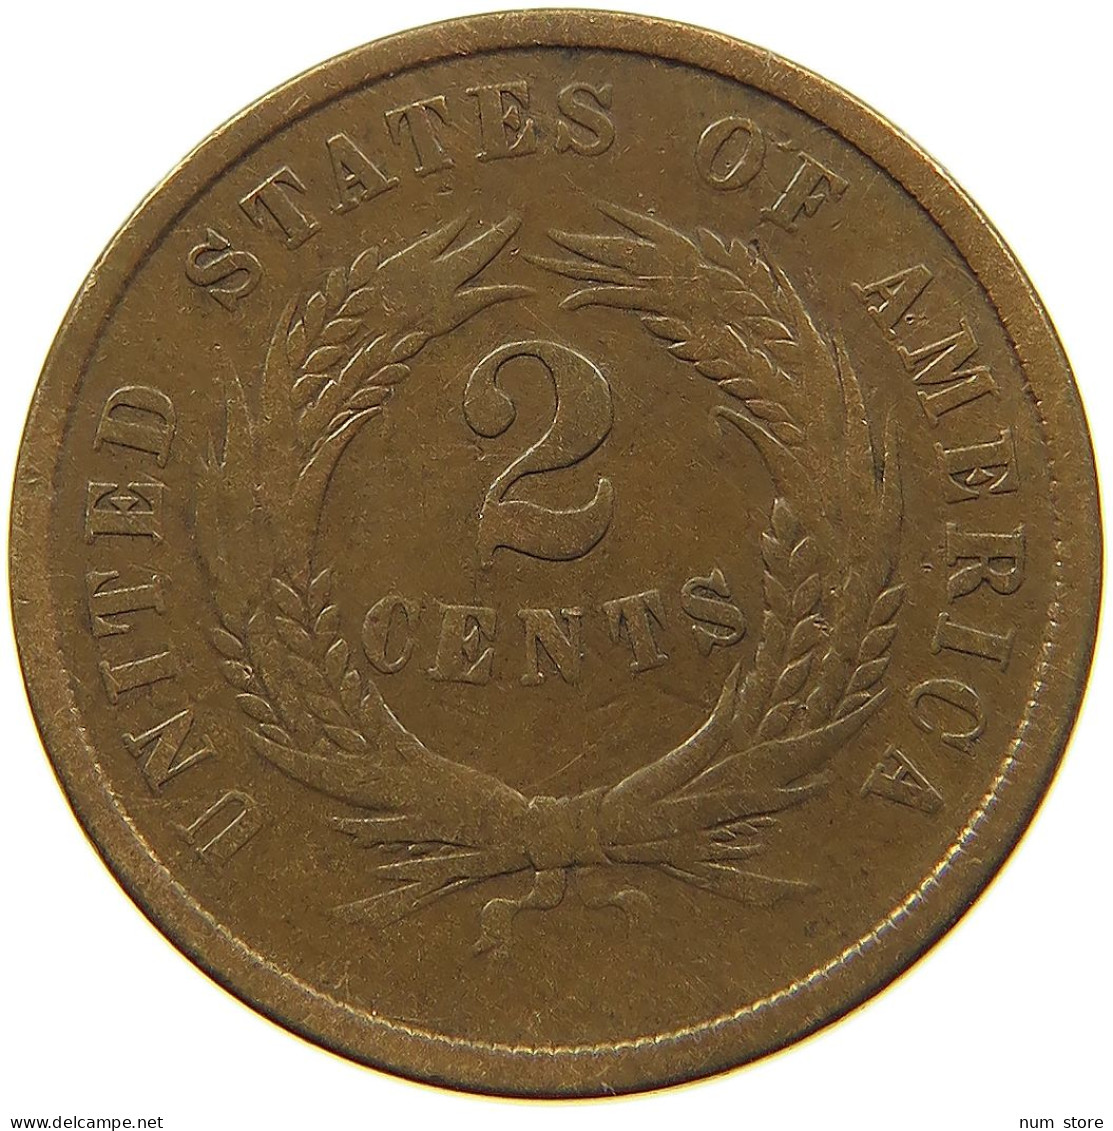 UNITED STATES OF AMERICA 2 CENTS 1864  #MA 100974 - 2, 3 & 20 Cent